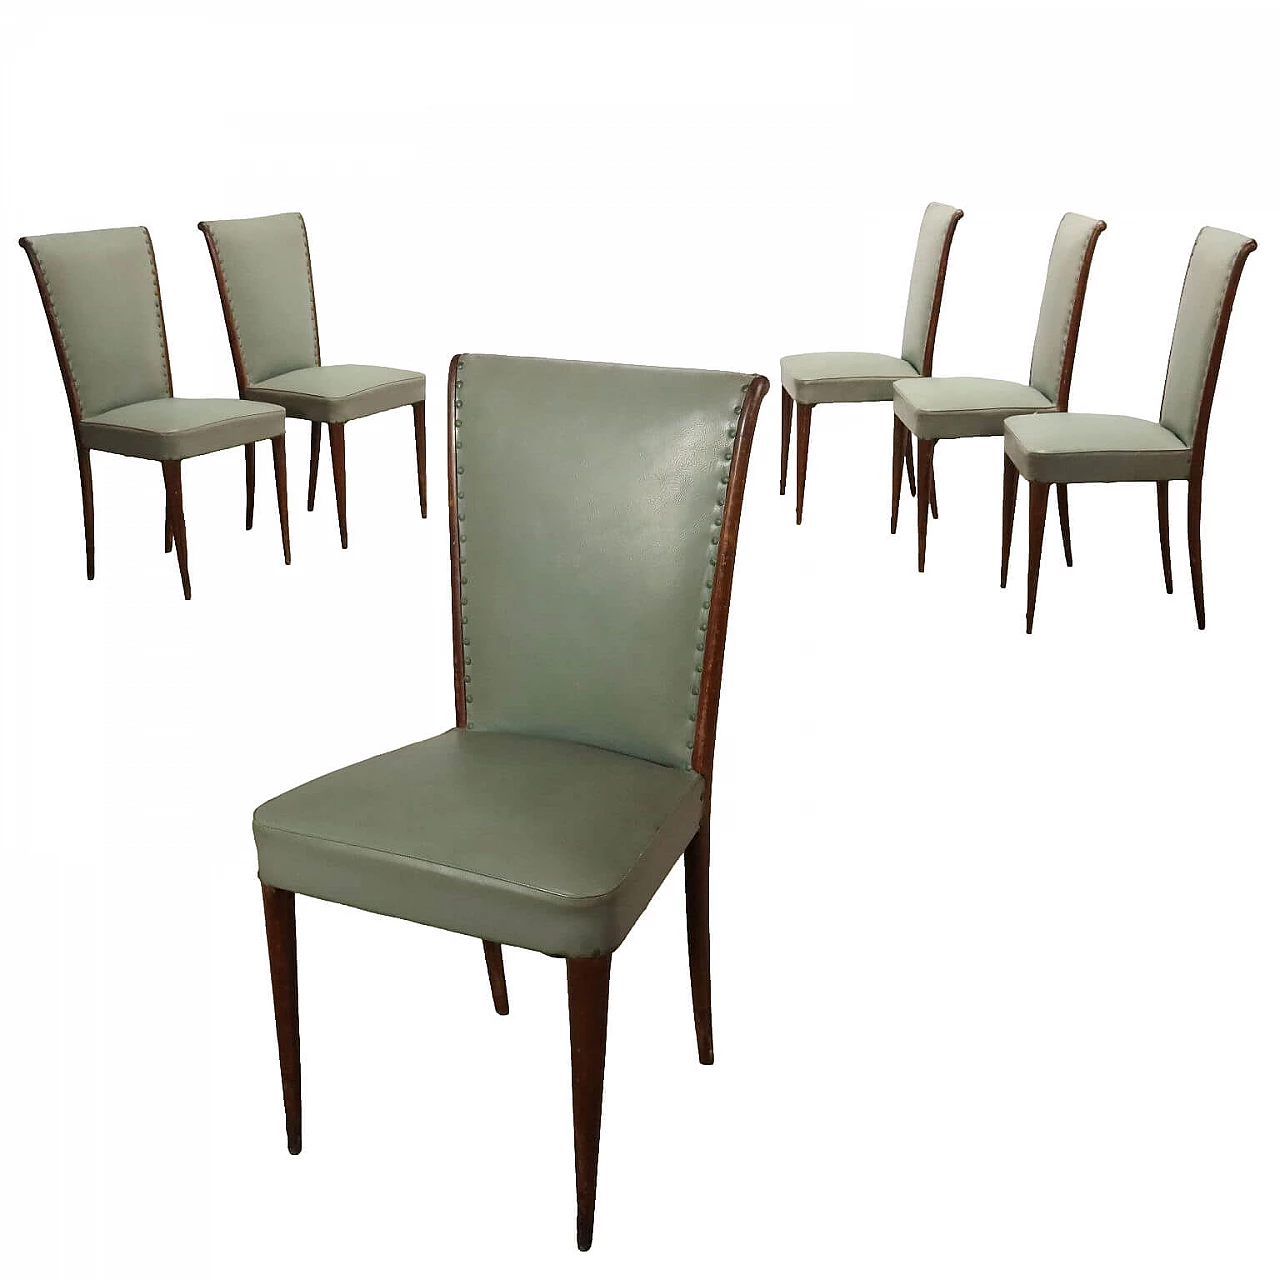 6 beech chairs, upholstered seat covered in faux leather, 1950s 1